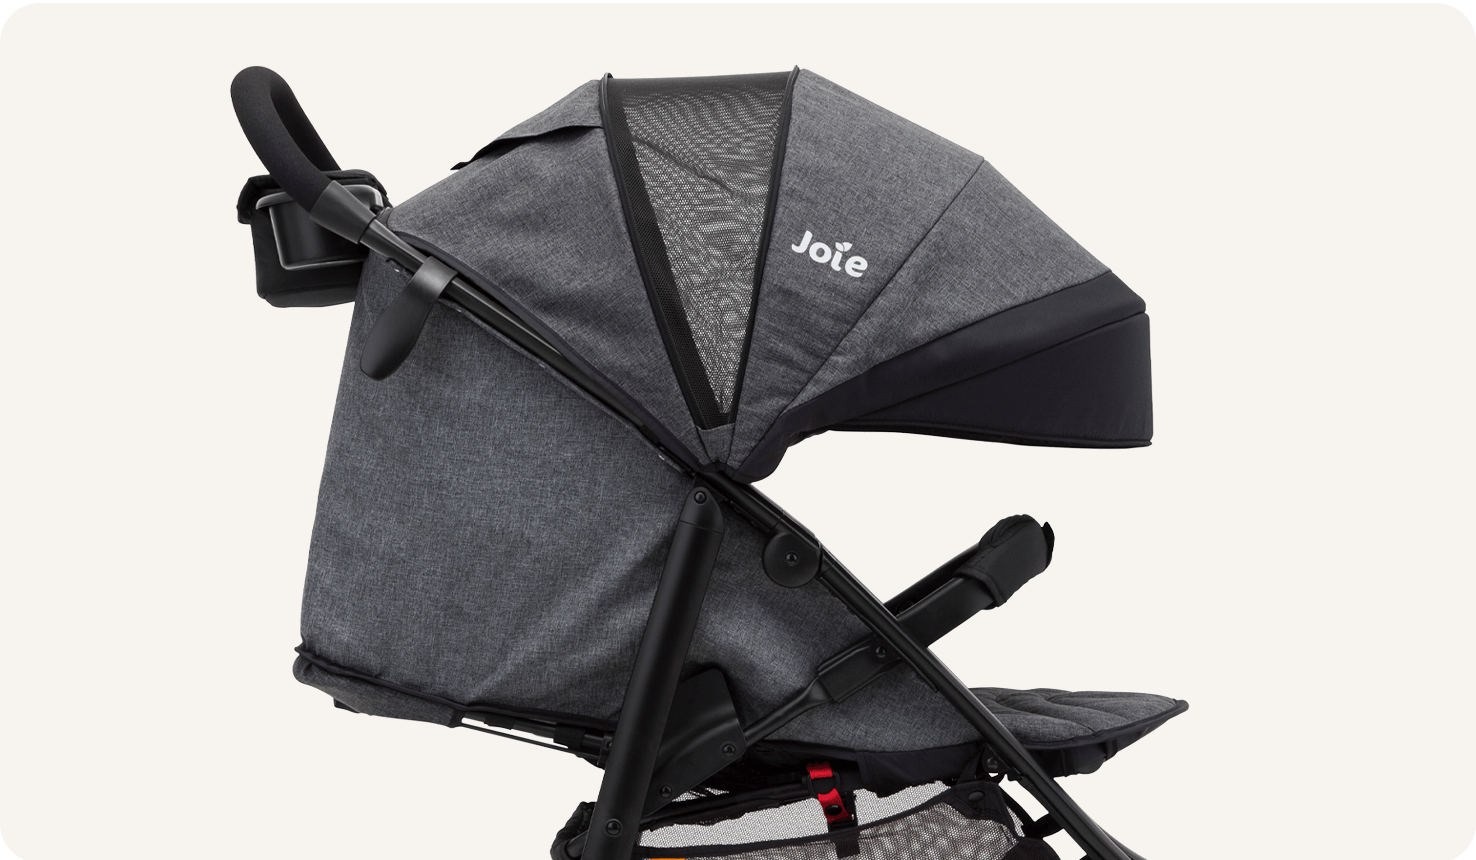  Closeup on a black Joie Litetrax 4 stroller, facing toward the right in profile, fully reclined and with the canopy extended.